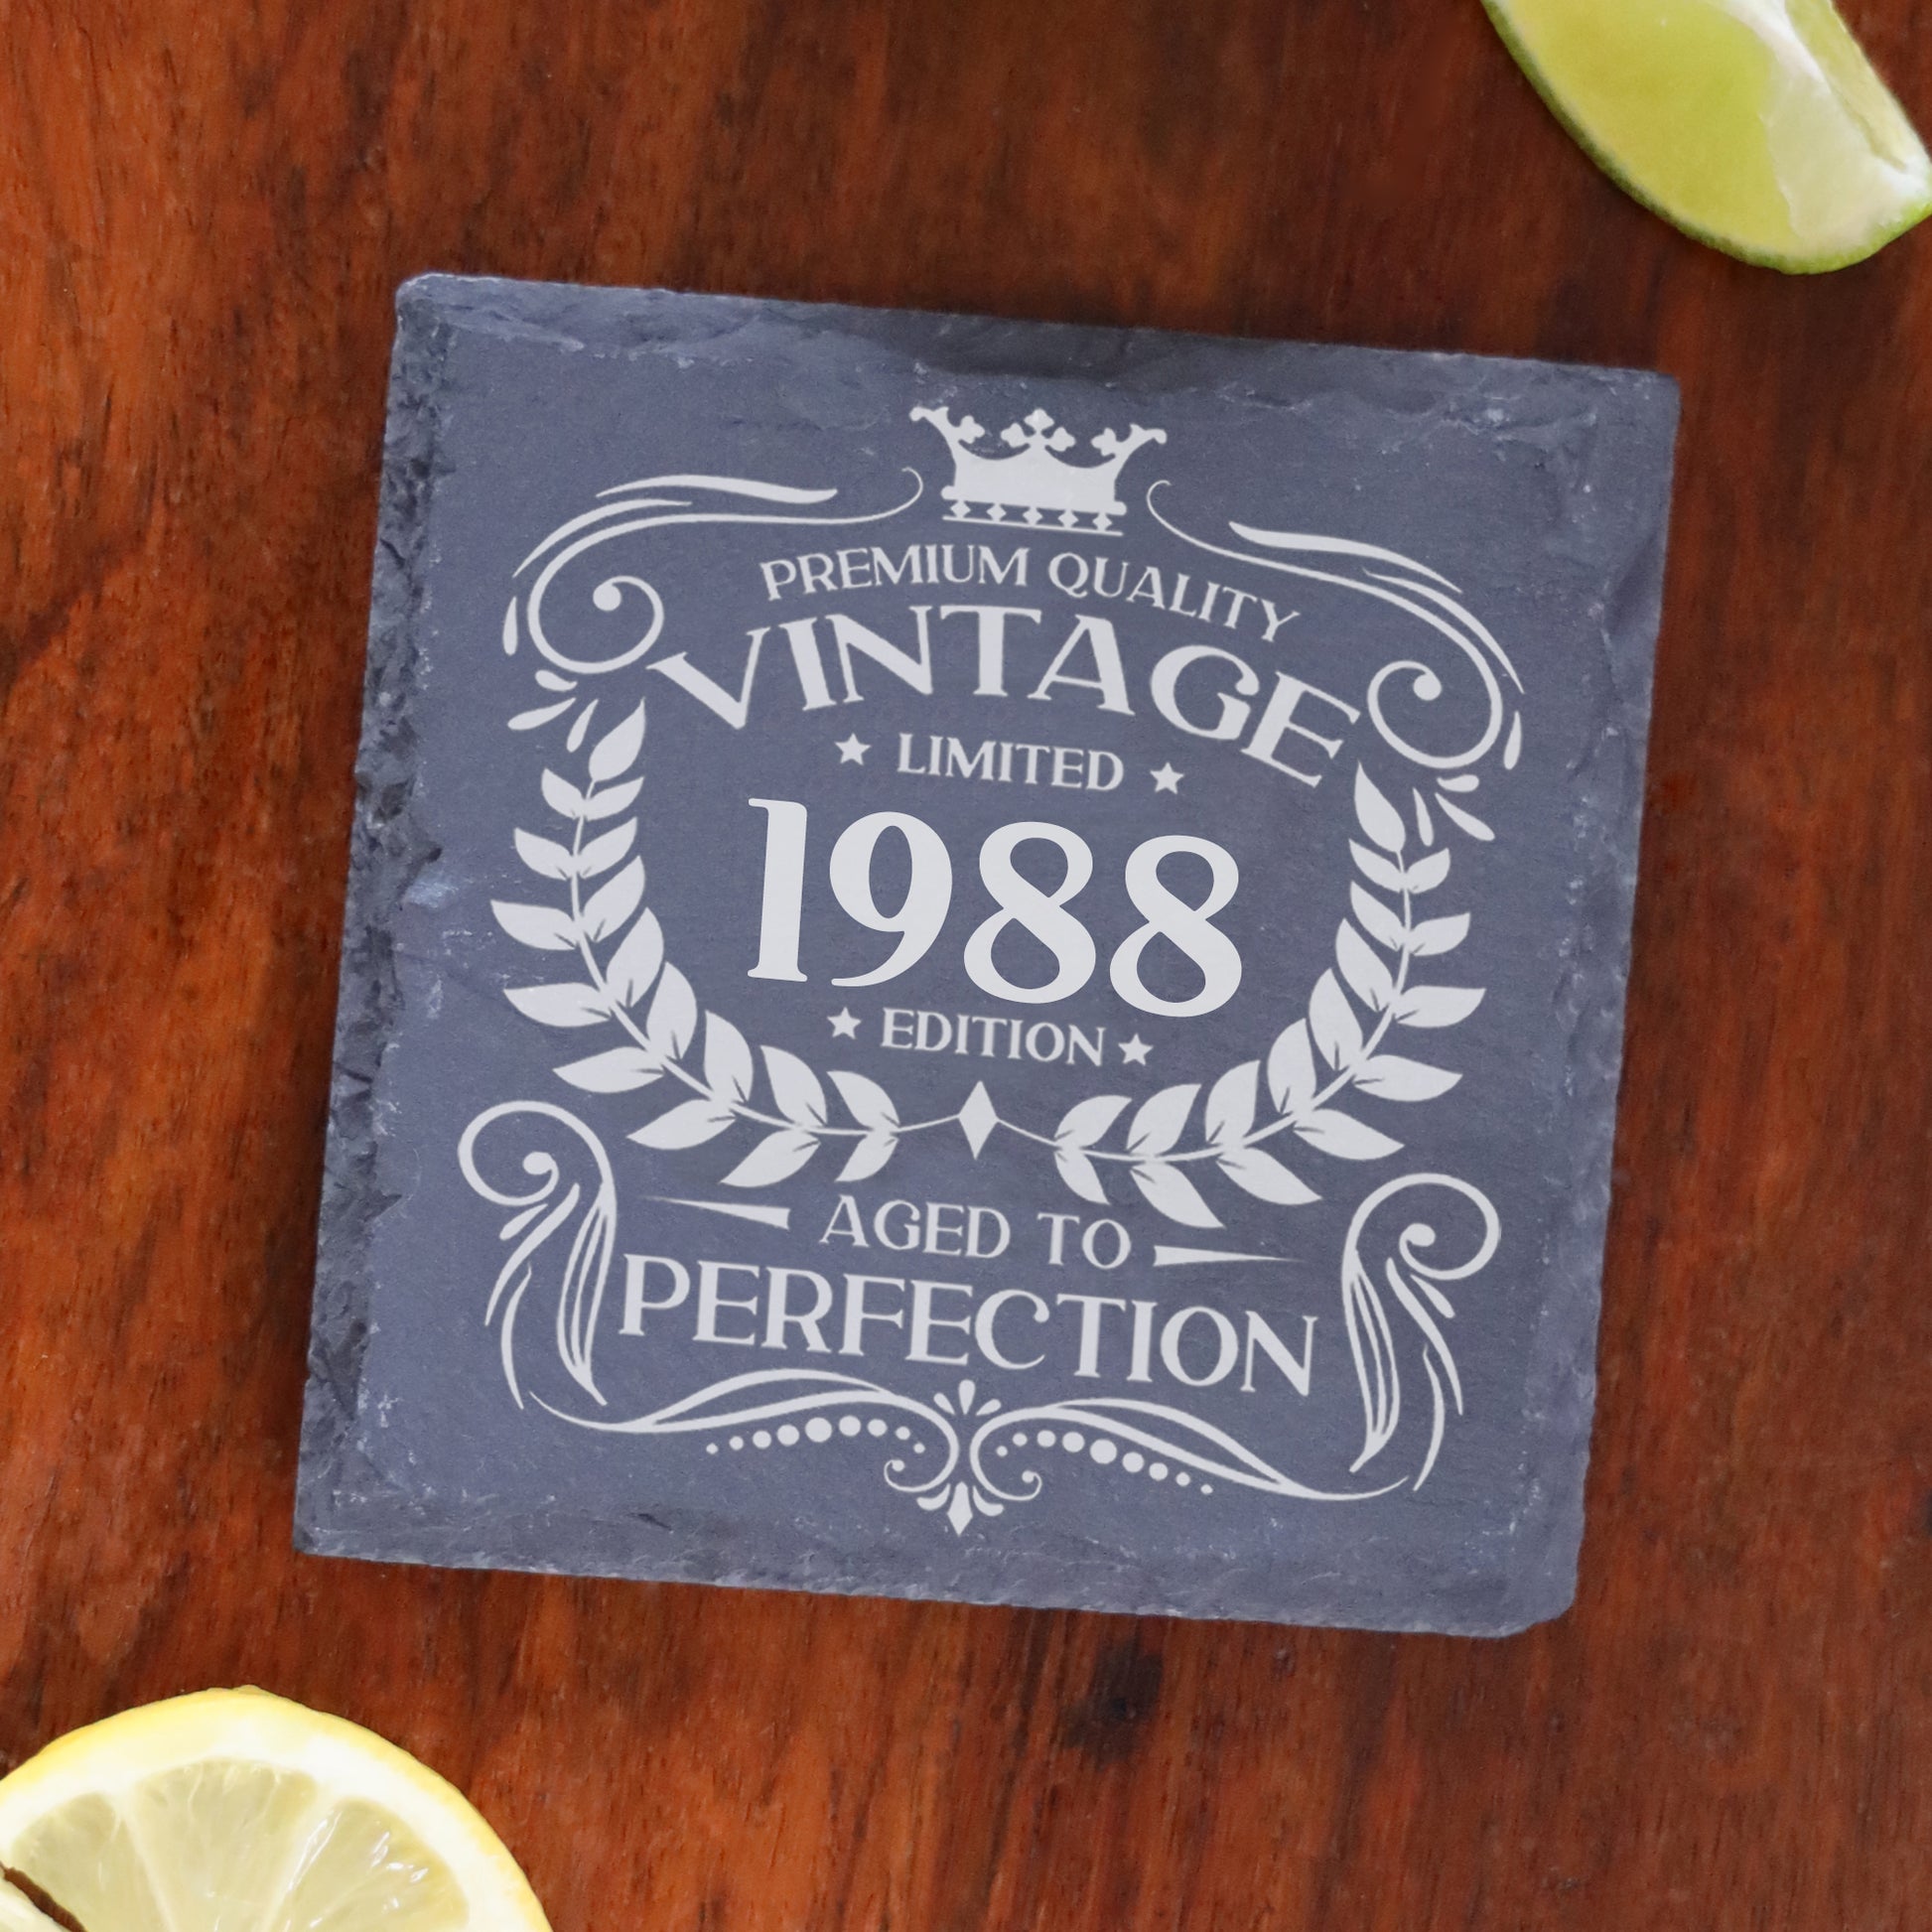 Personalised Vintage 1988 Mug and/or Coaster  - Always Looking Good - Square Coaster On Its Own  